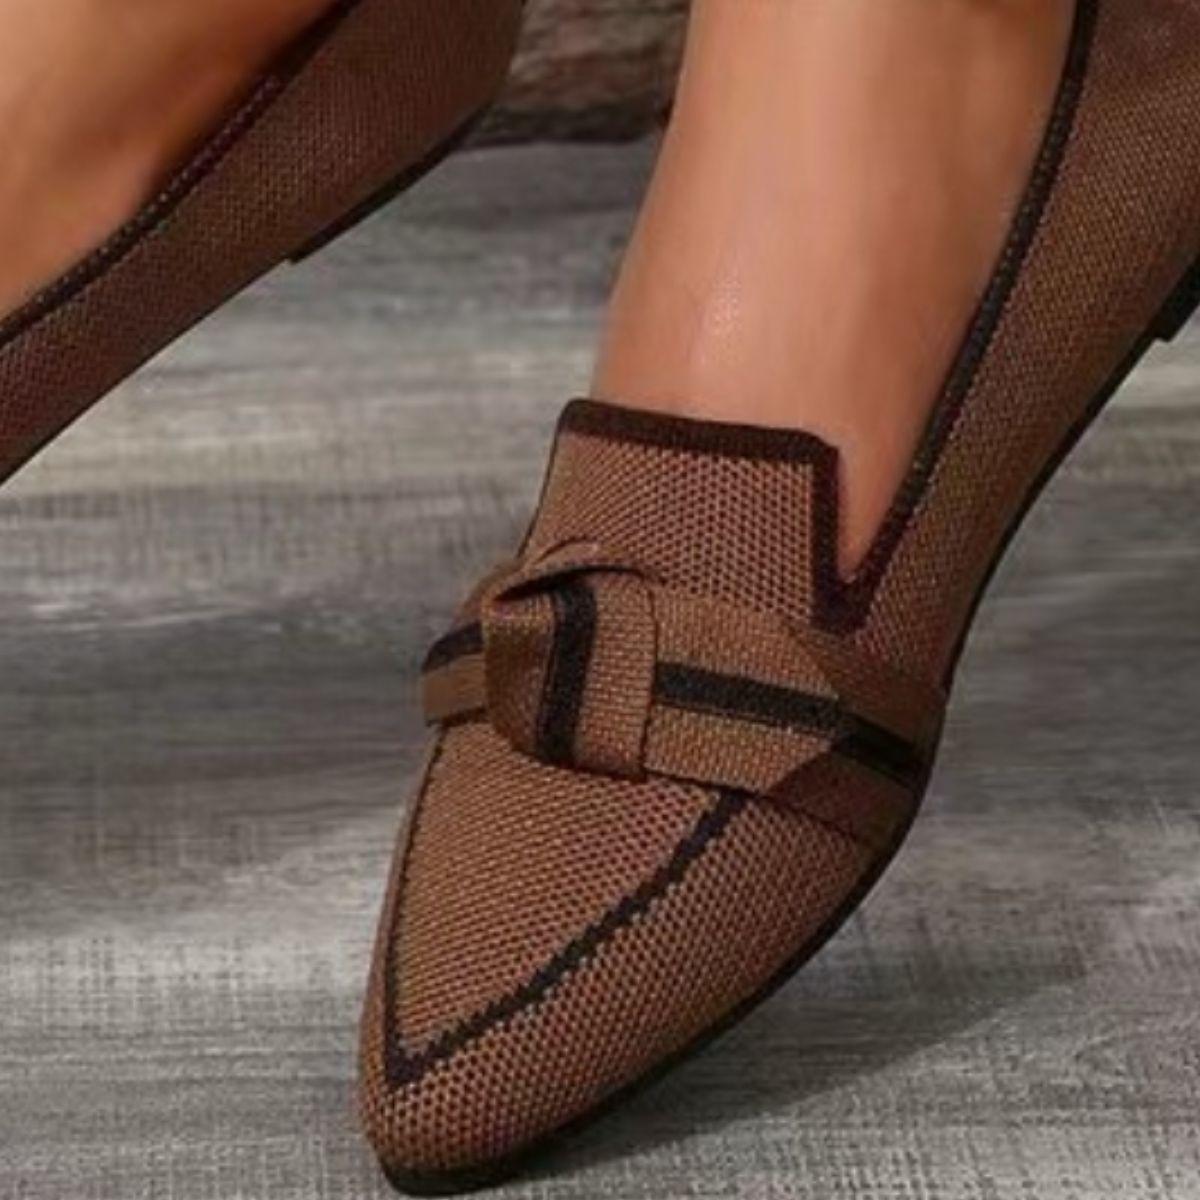 a close up of a person wearing brown shoes